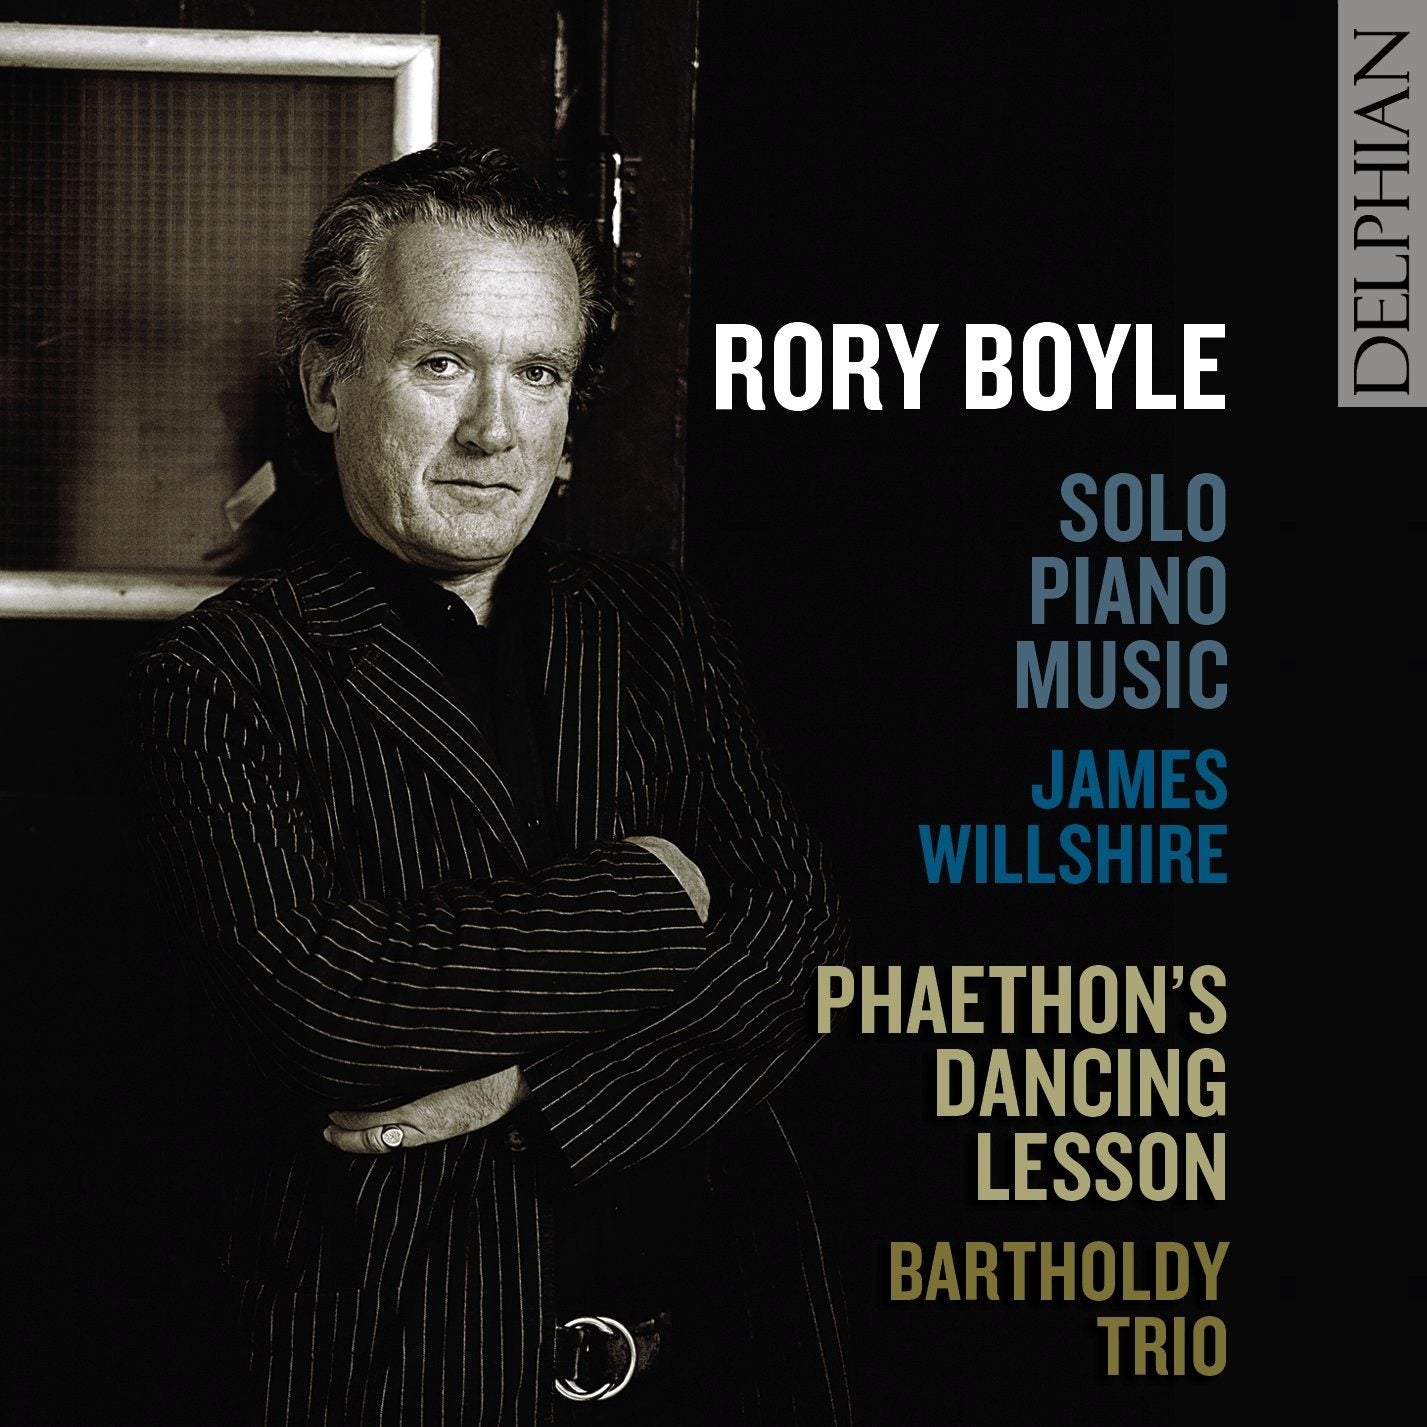 Rory Boyle: Music for solo piano; Phaethon’s Dancing Lesson